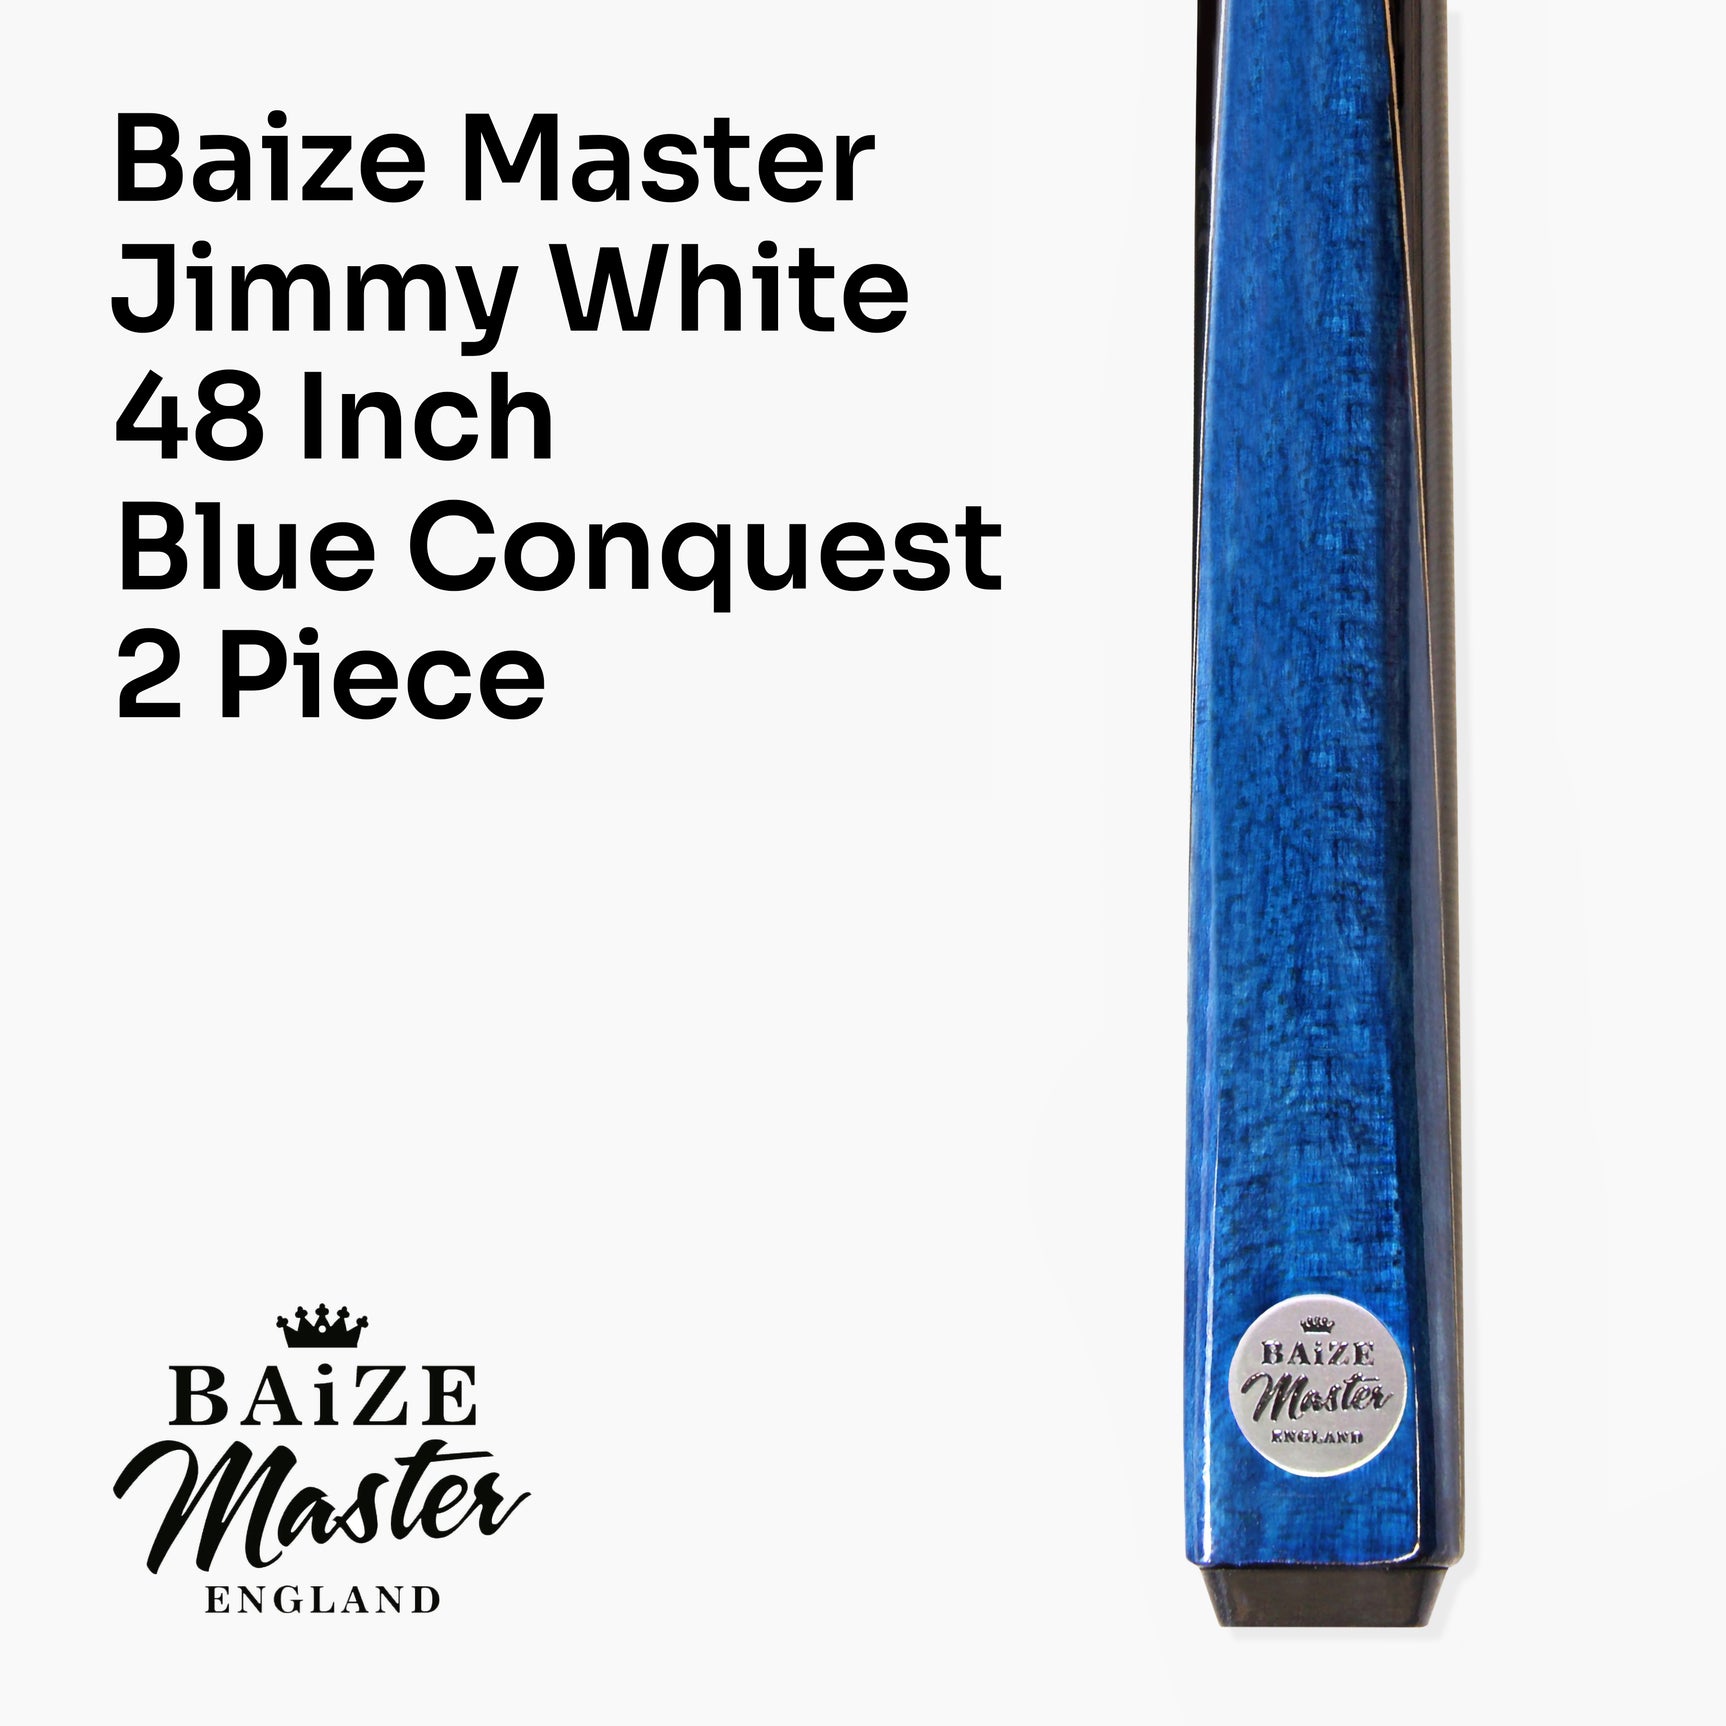 Baize Master JIMMY WHITE Signature CONQUEST 48 Inch 2 Piece Kids Snooker Pool Cue 9.5mm Tip